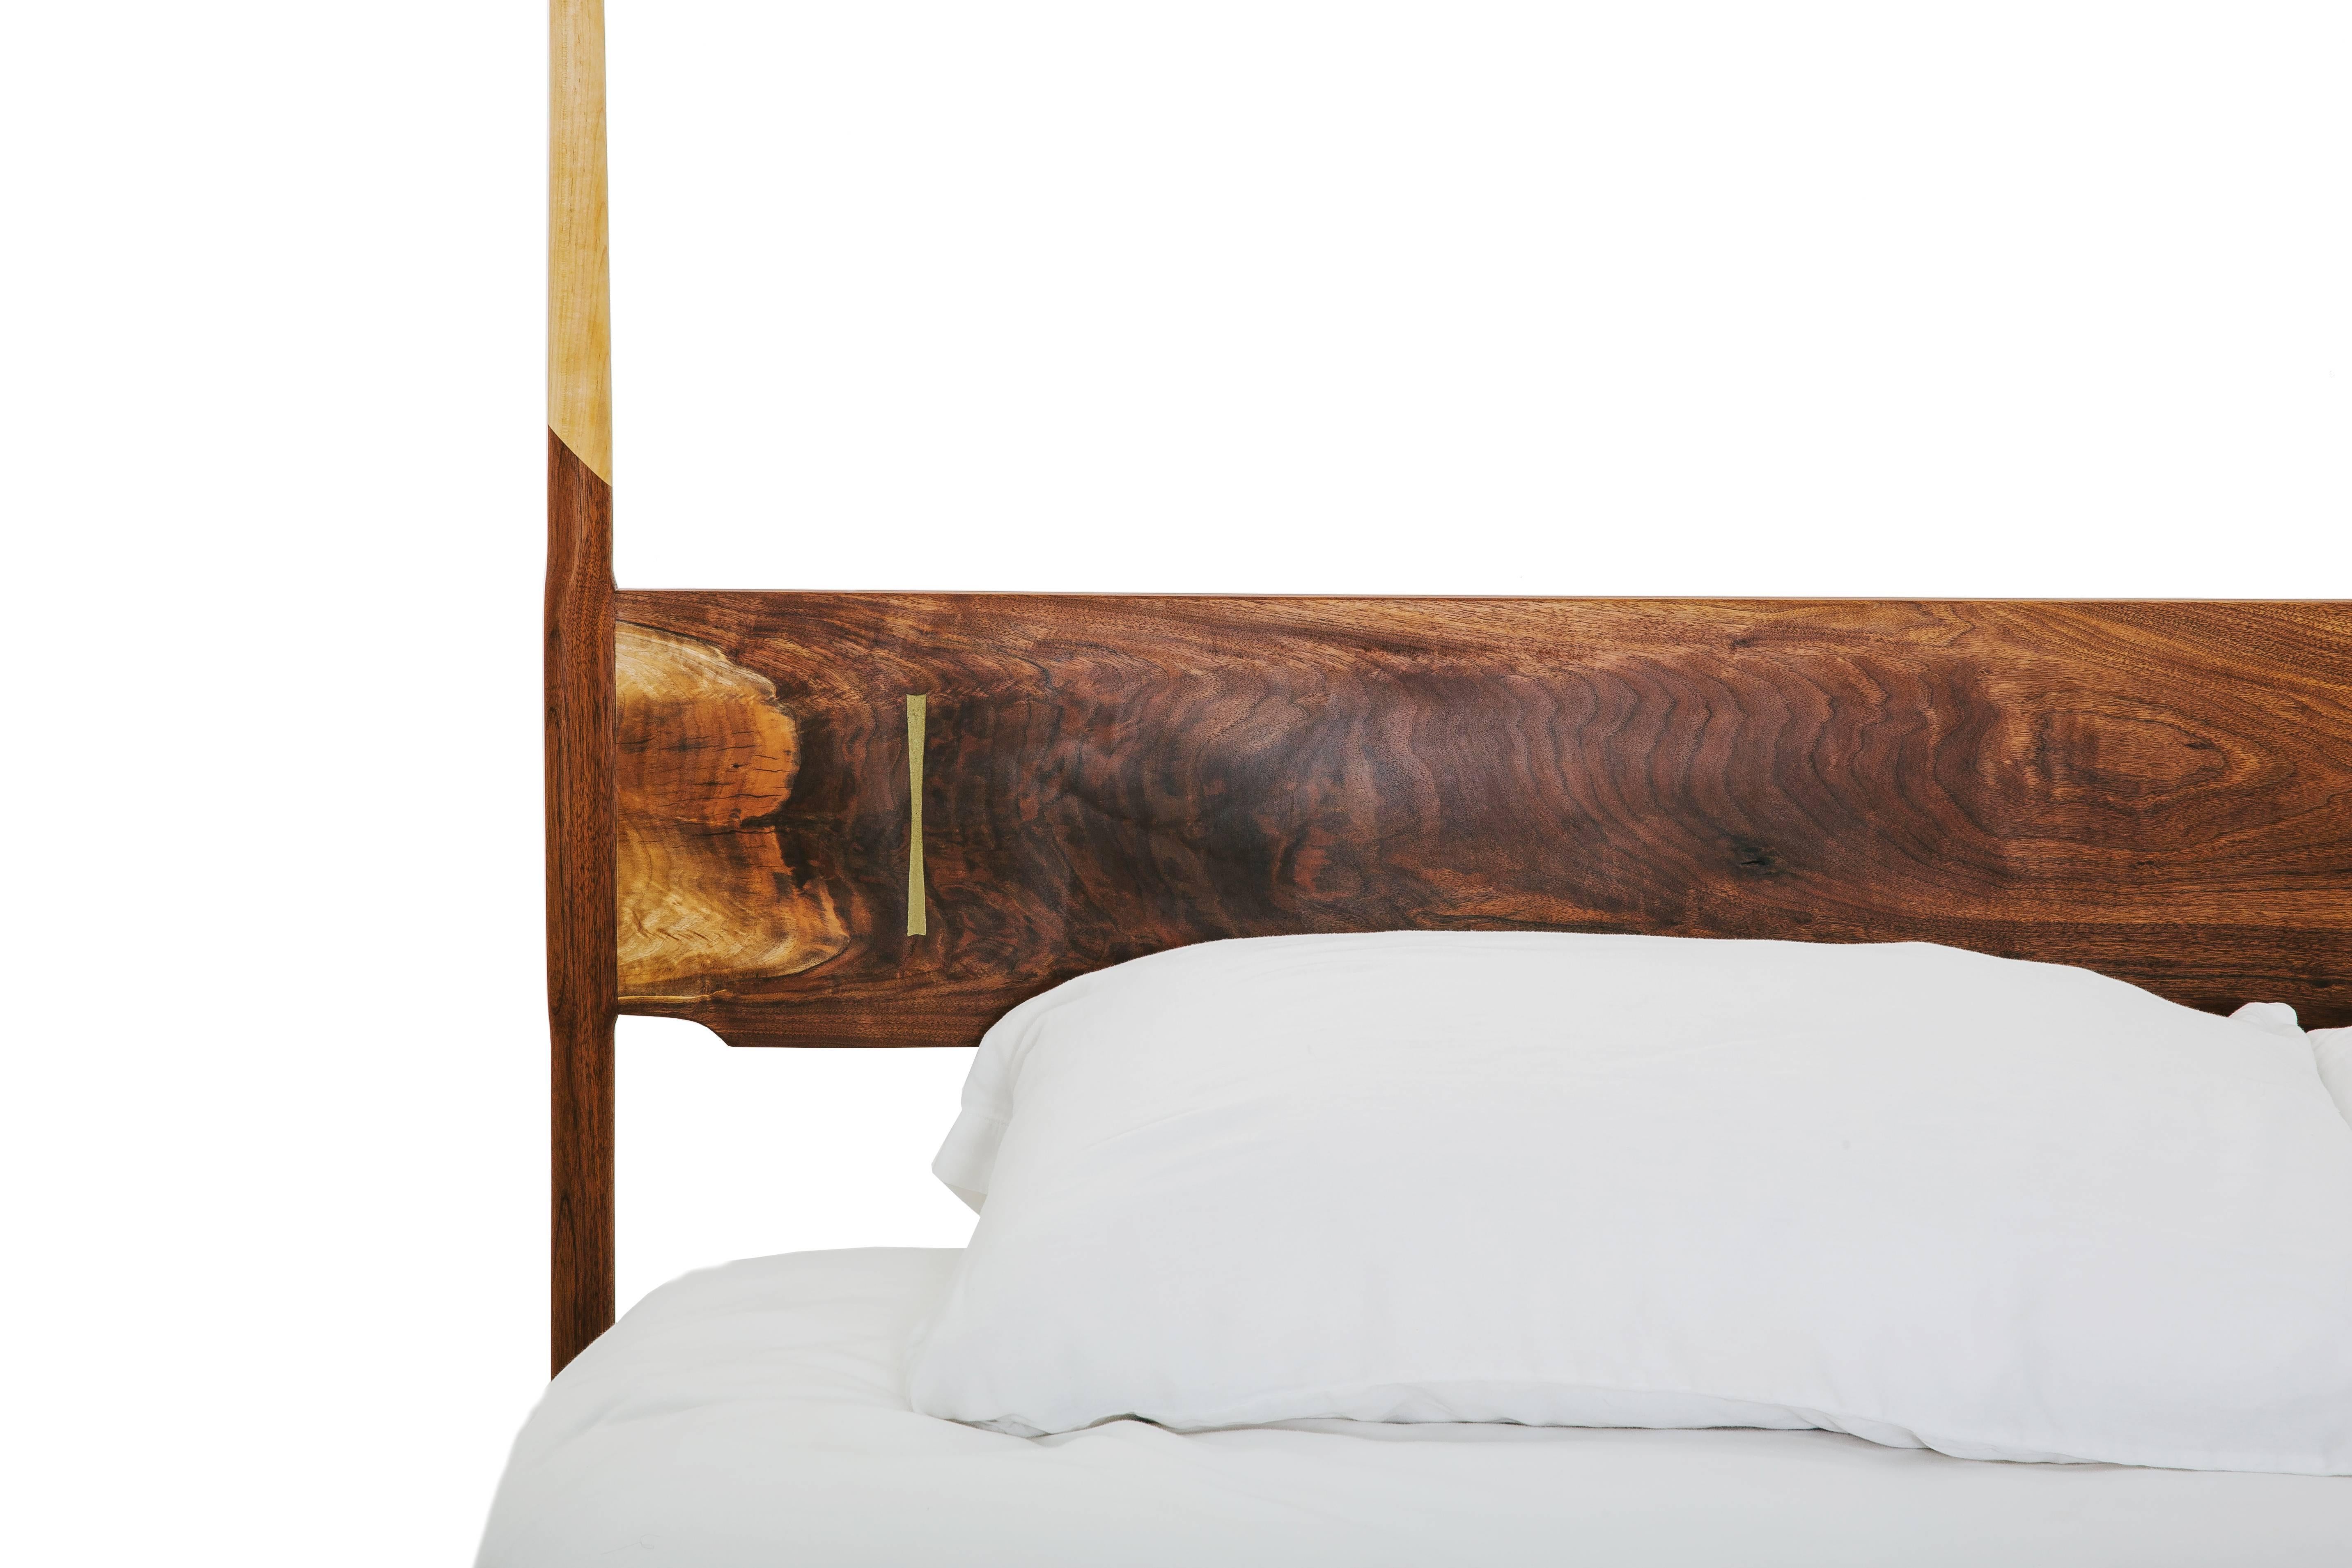 Four Post Mid Century Modern, hand crafted bed with solid wood construction, hand-cut joinery and custom Dutchman joint. Handmade in Los Angeles, California.

Bed frame available in King or Queen.

Headboard / Bed frame as shown in walnut with